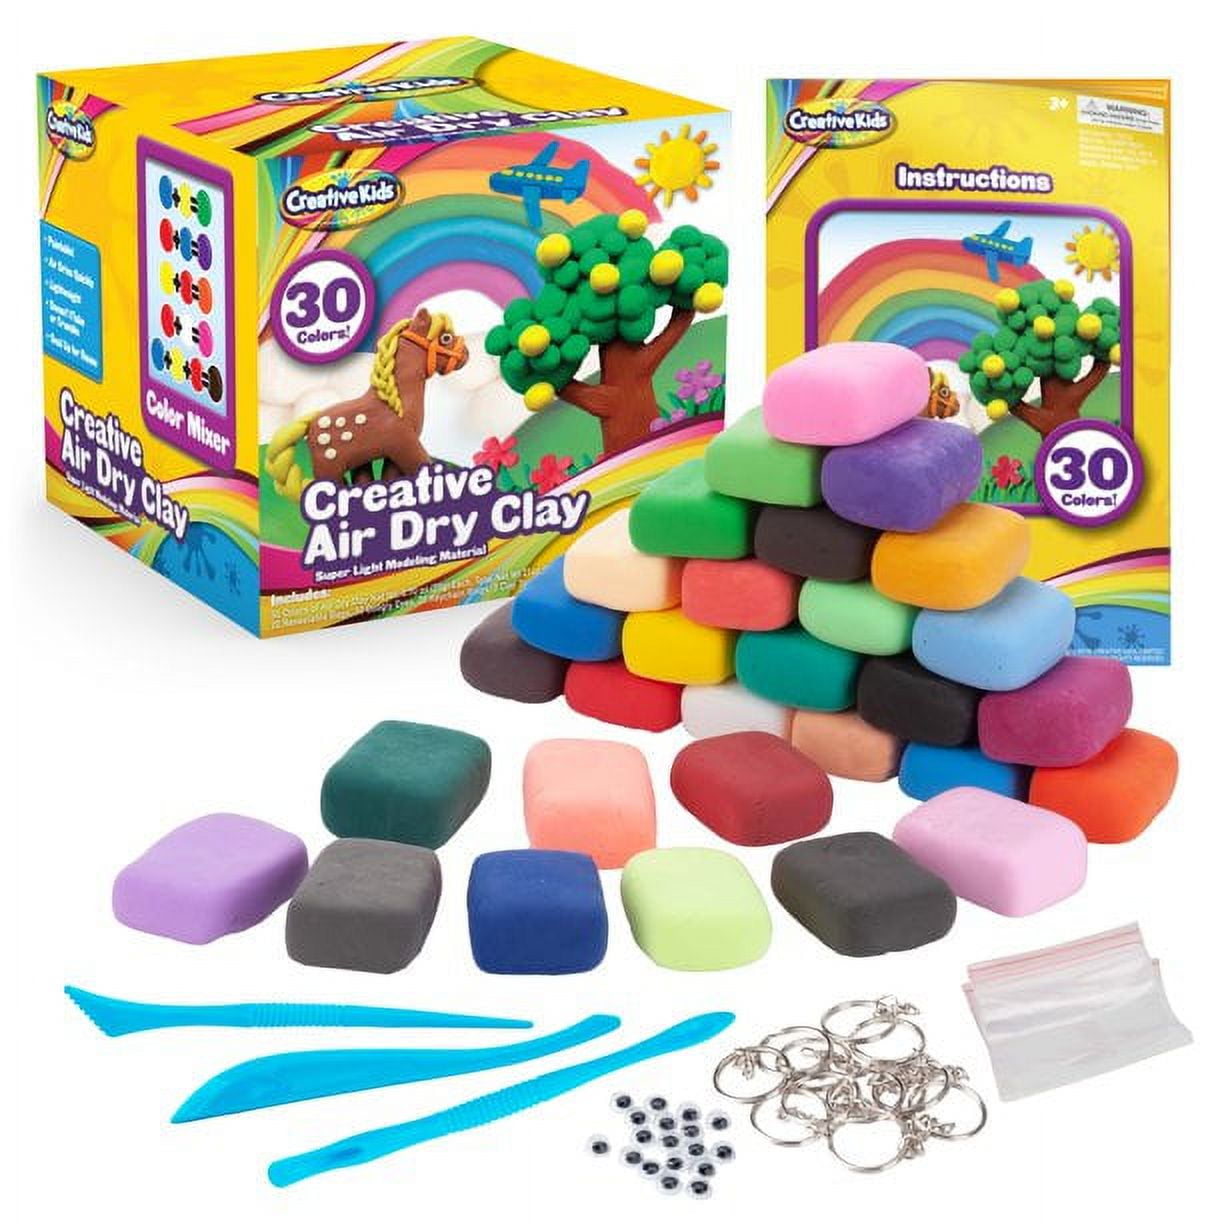 Sago Brothers Air Dry clay, 24 colors Modeling clay for Kids